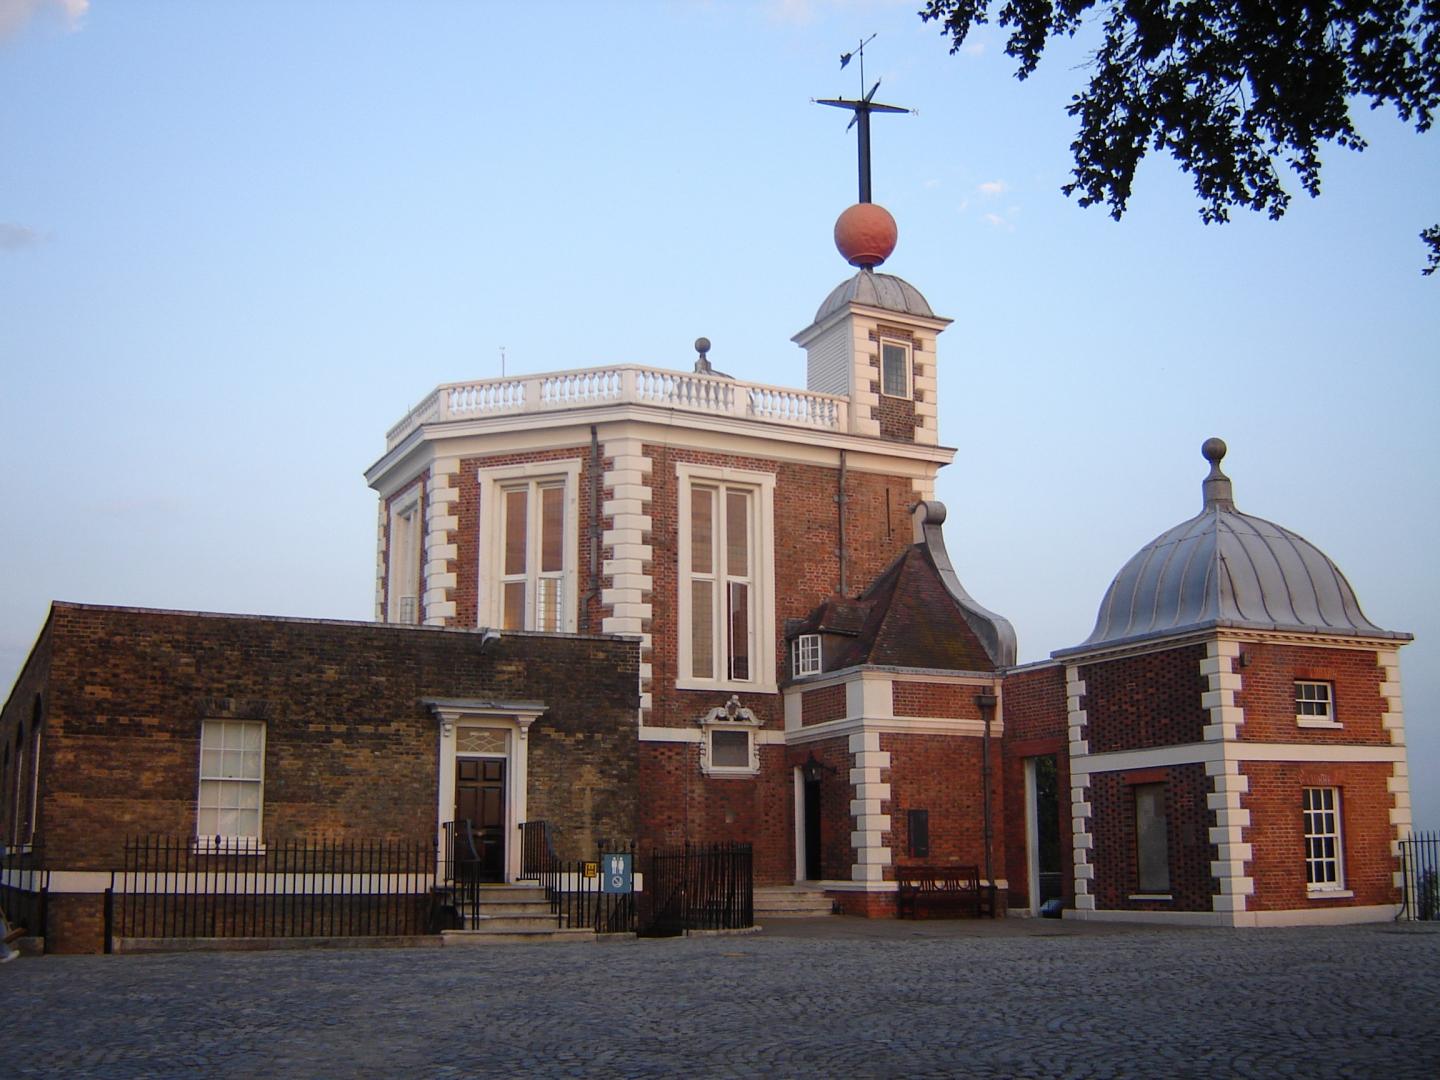 Royal Observatory Greenwich - Flamsteed House